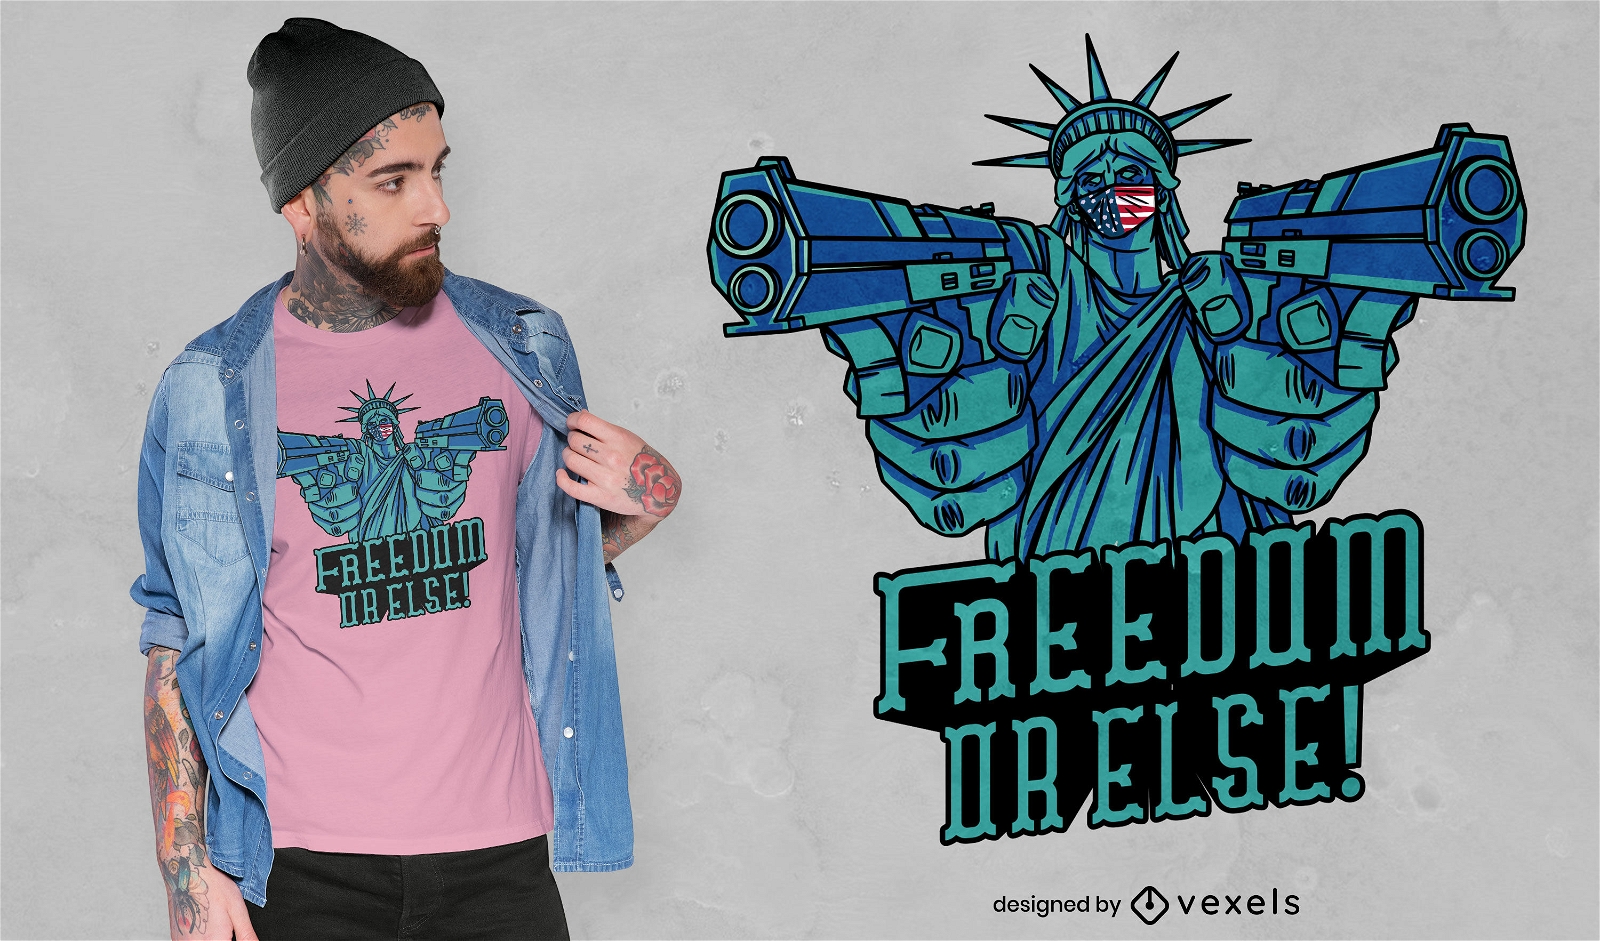 Freedom or else quote t-shirt design